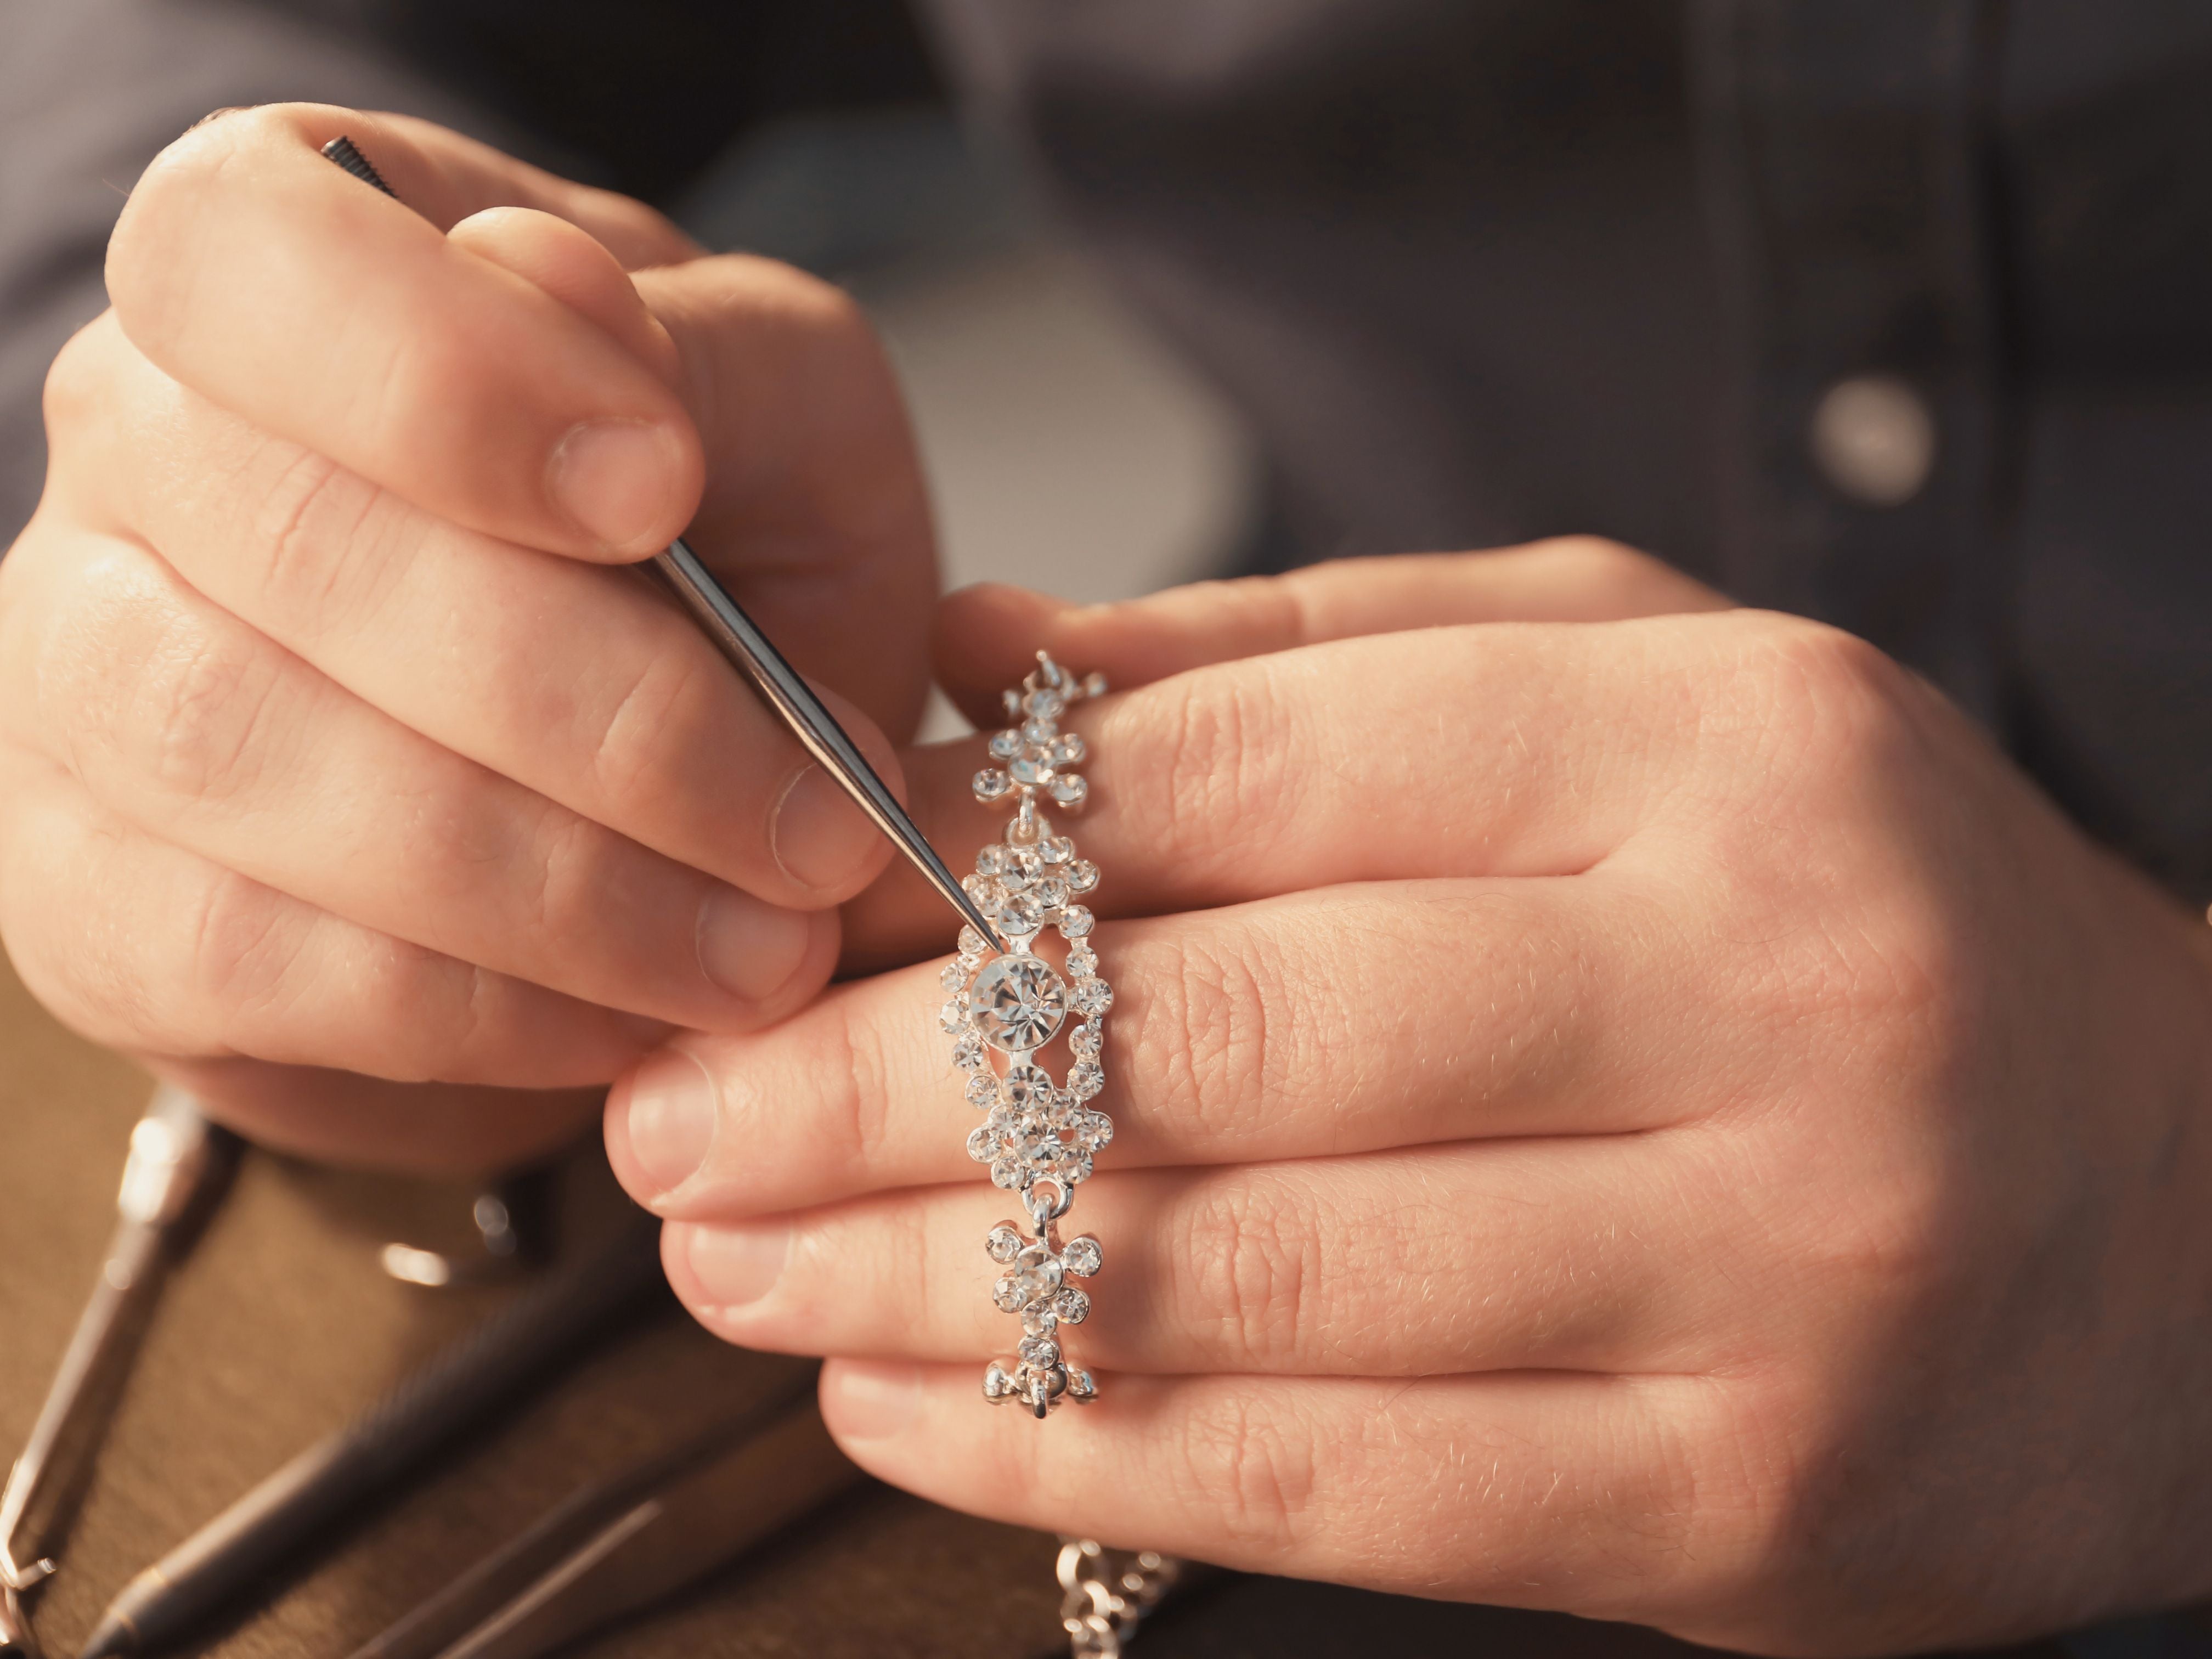 What is permanent jewelry?